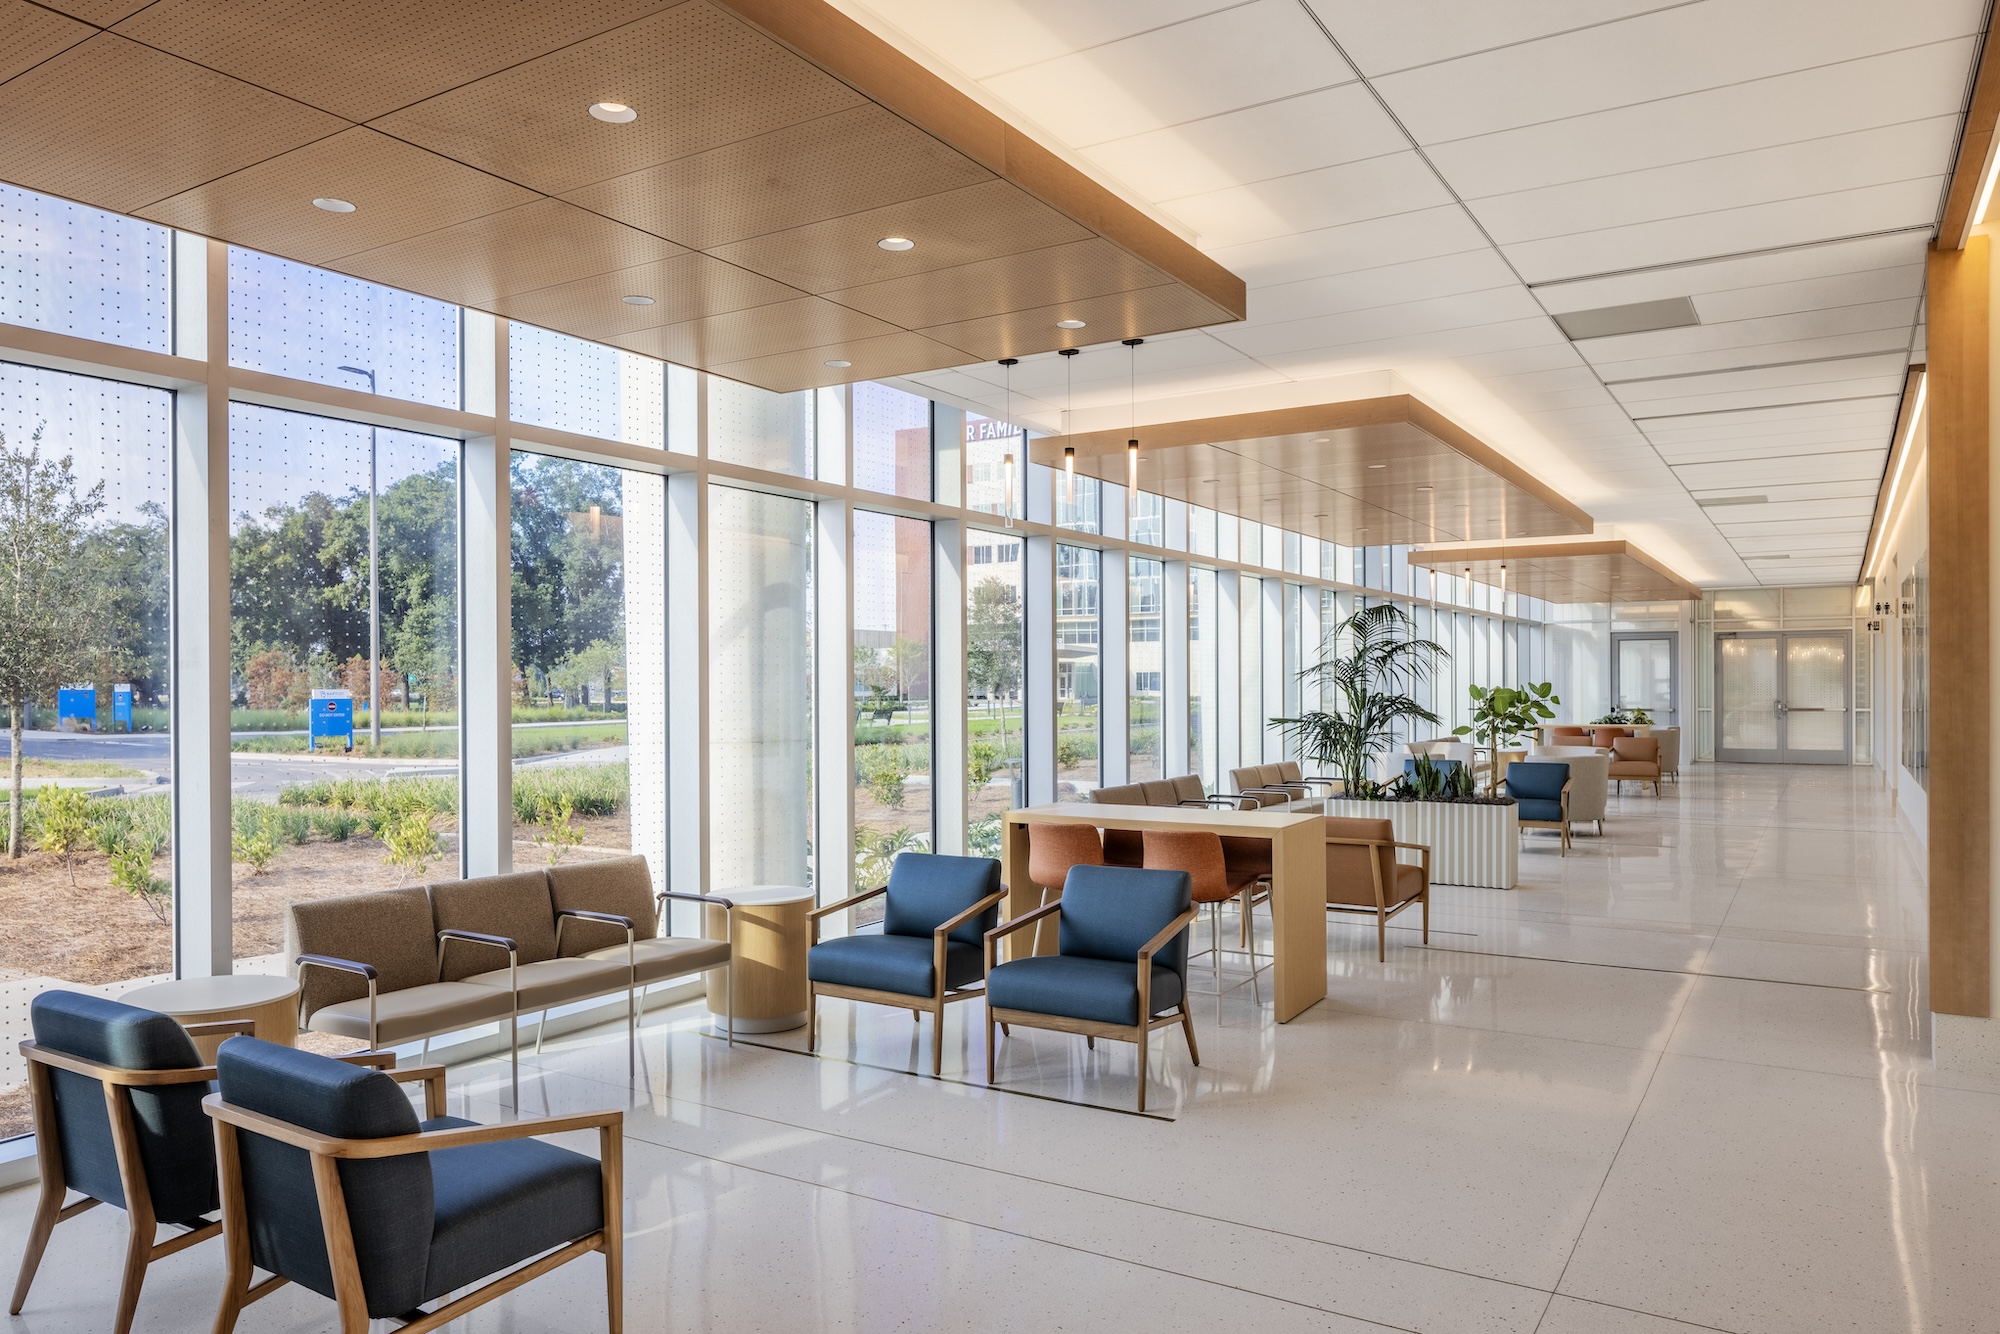 New $650 million Baptist Health Care complex opens in Pensacola